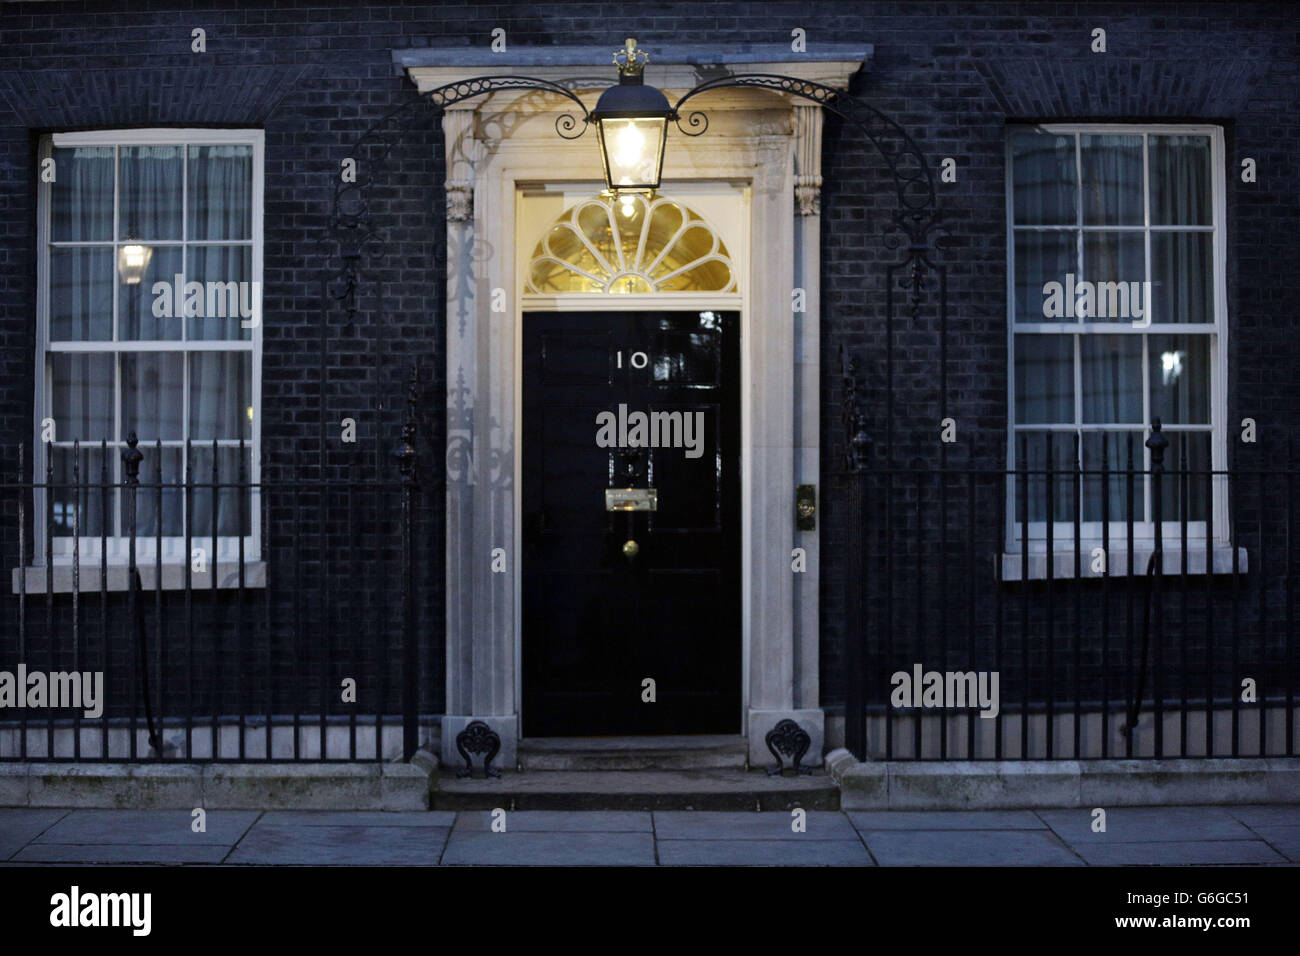 A light over the door of 10 Downing Street, the official residence of the Prime Minister, as UKIP leader Nigel Farage claimed victory for the Leave campaign in the EU referendum. Stock Photo